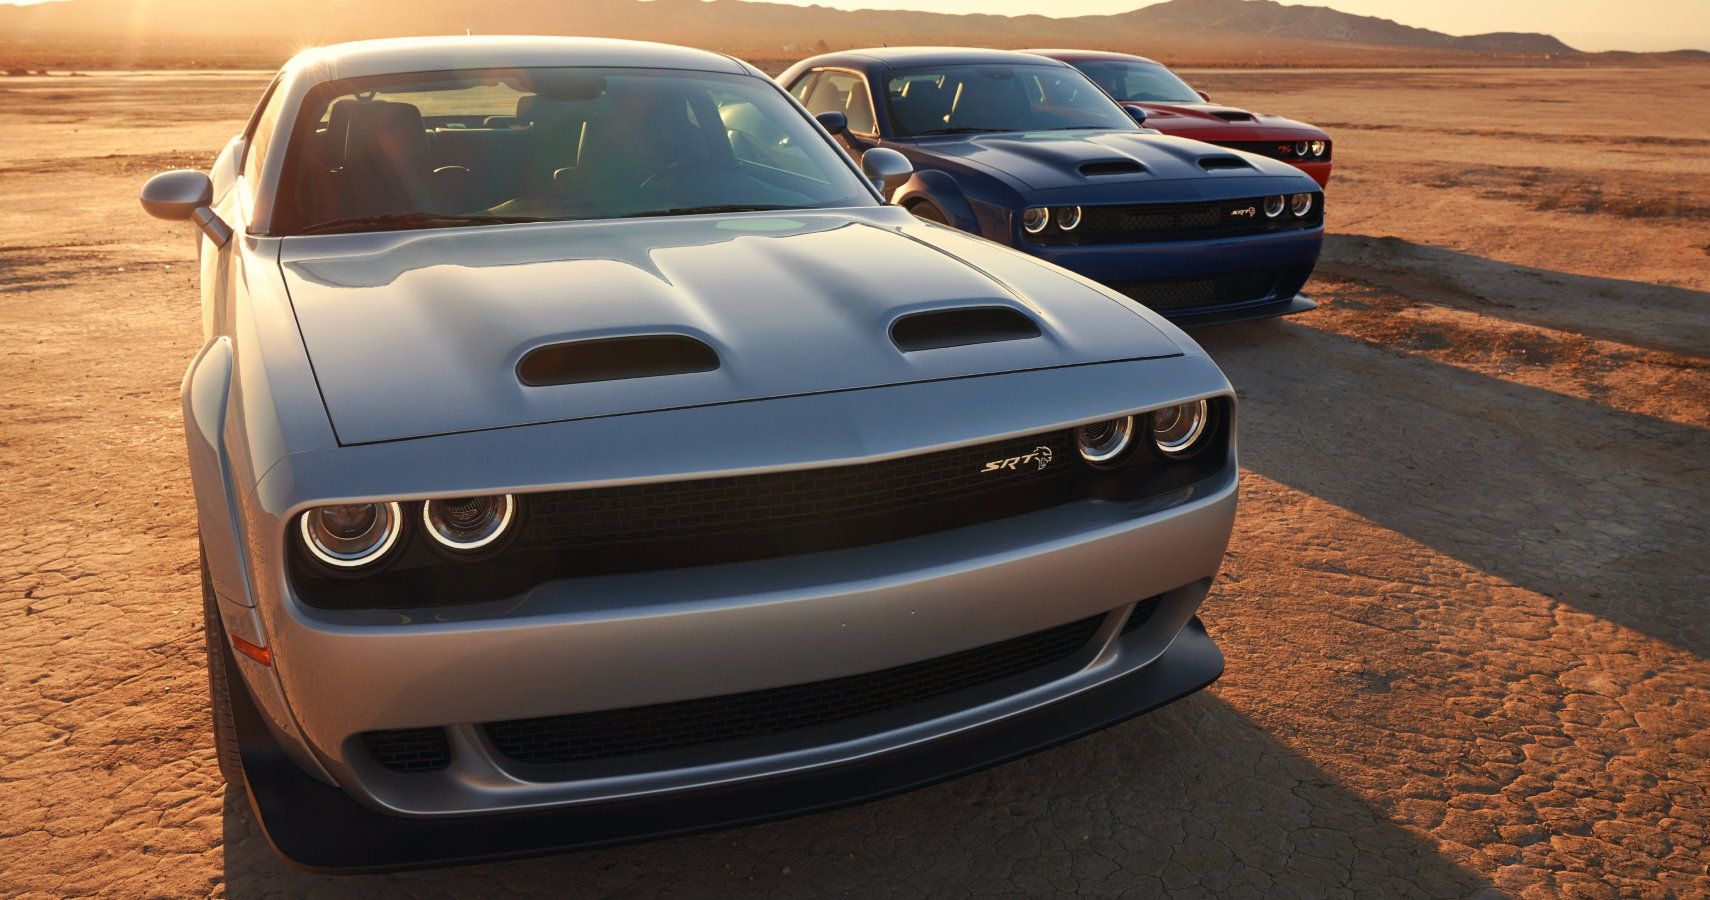 Dodge Charger, Challenger Now Out-Selling Camaro And Mustang